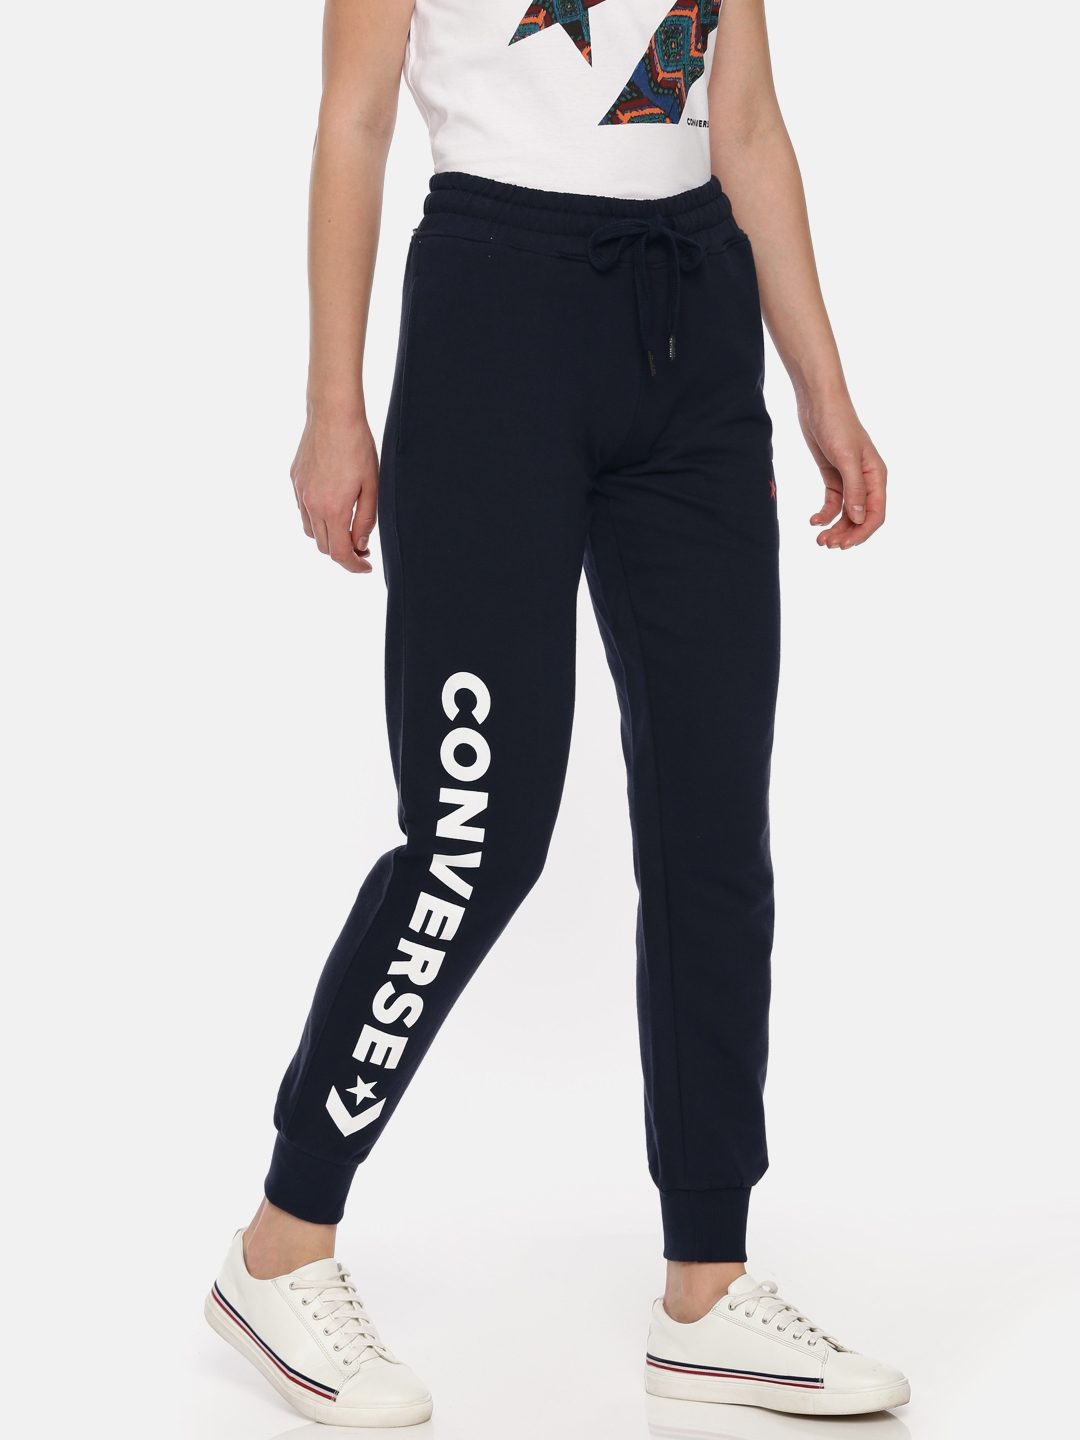 joggers with converse womens